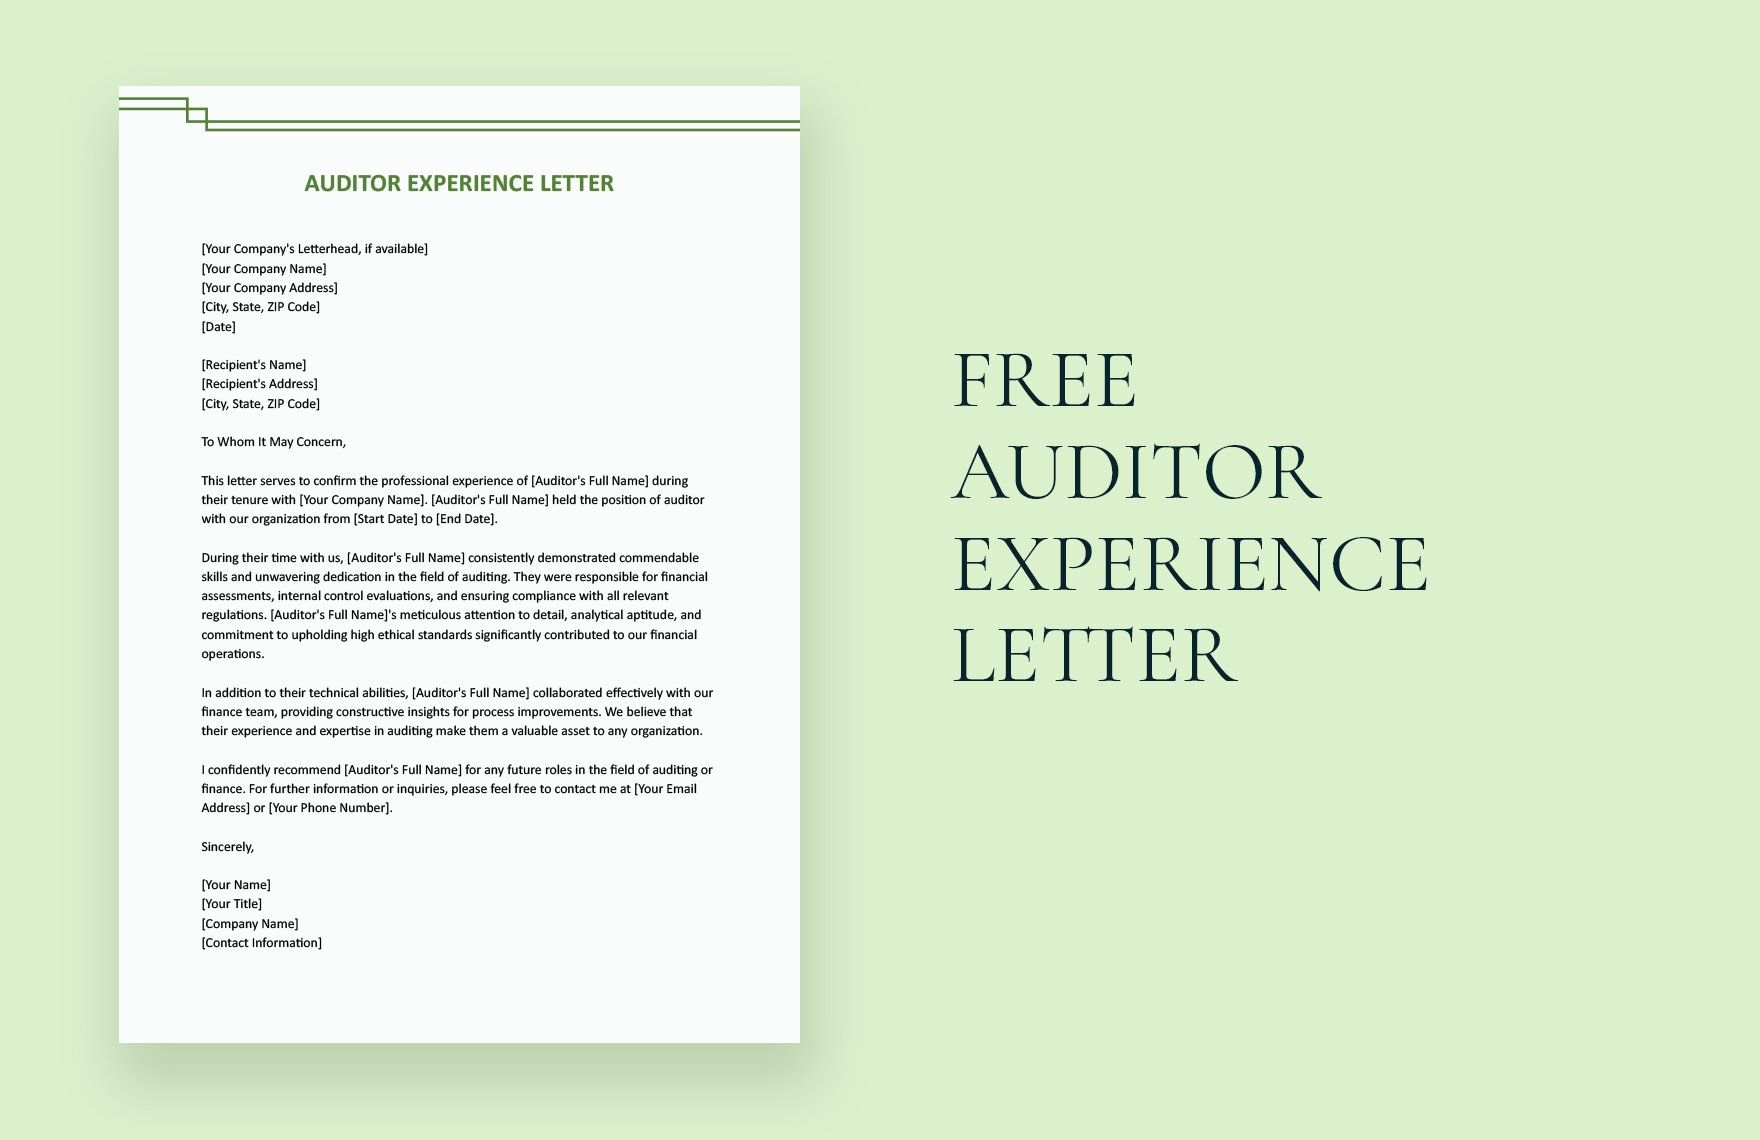 Auditor Experience Letter